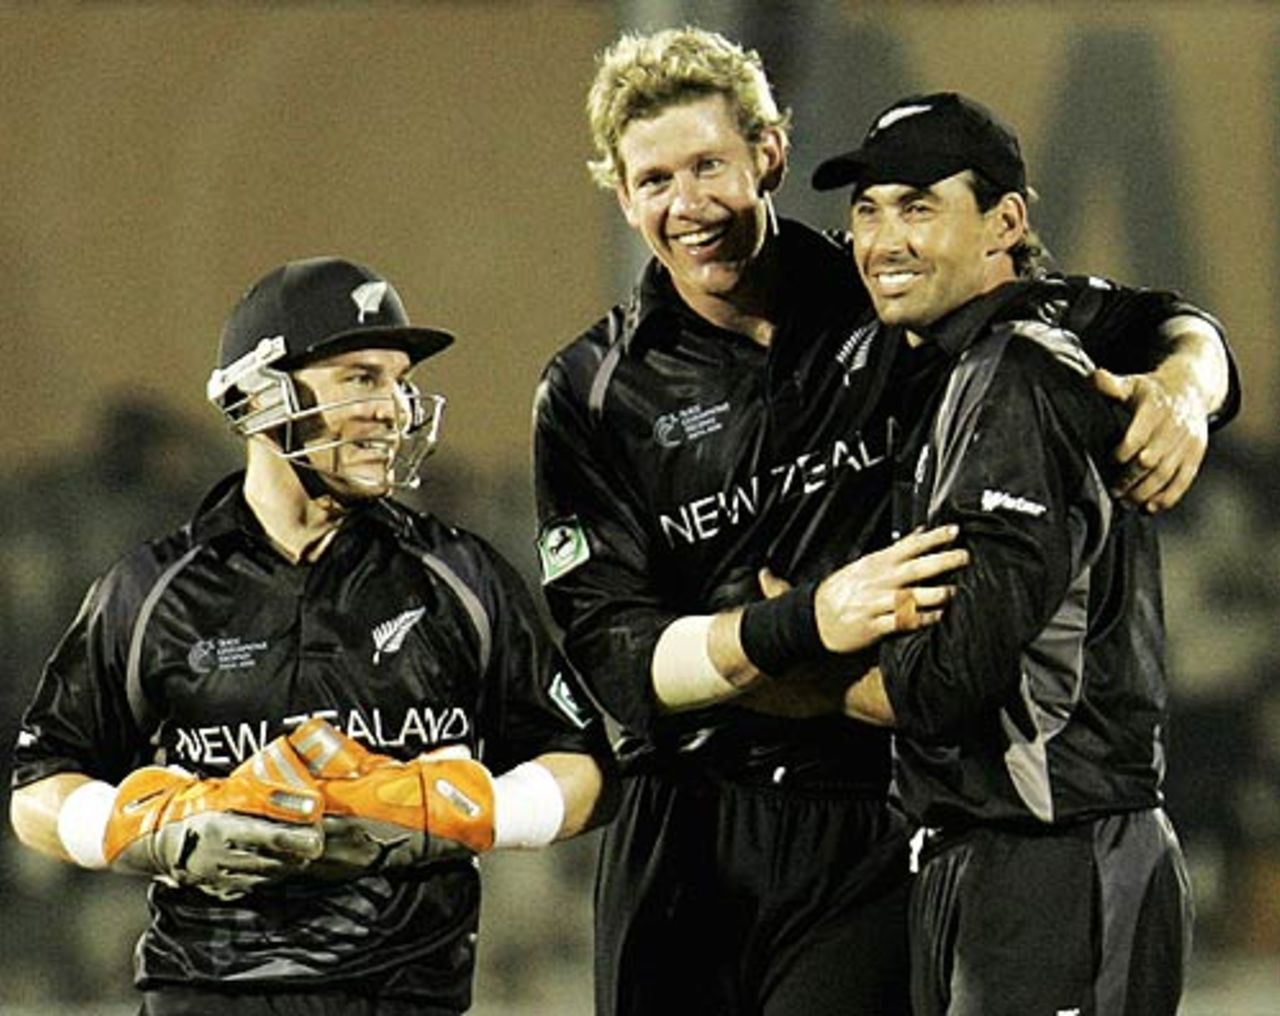 Jacob Oram pleases his captain, Stephen Fleming, with another scalp as Brendon McCullum looks on, New Zealand v South Africa, 2nd Match, Champions Trophy, Mumbai, October 16, 2006